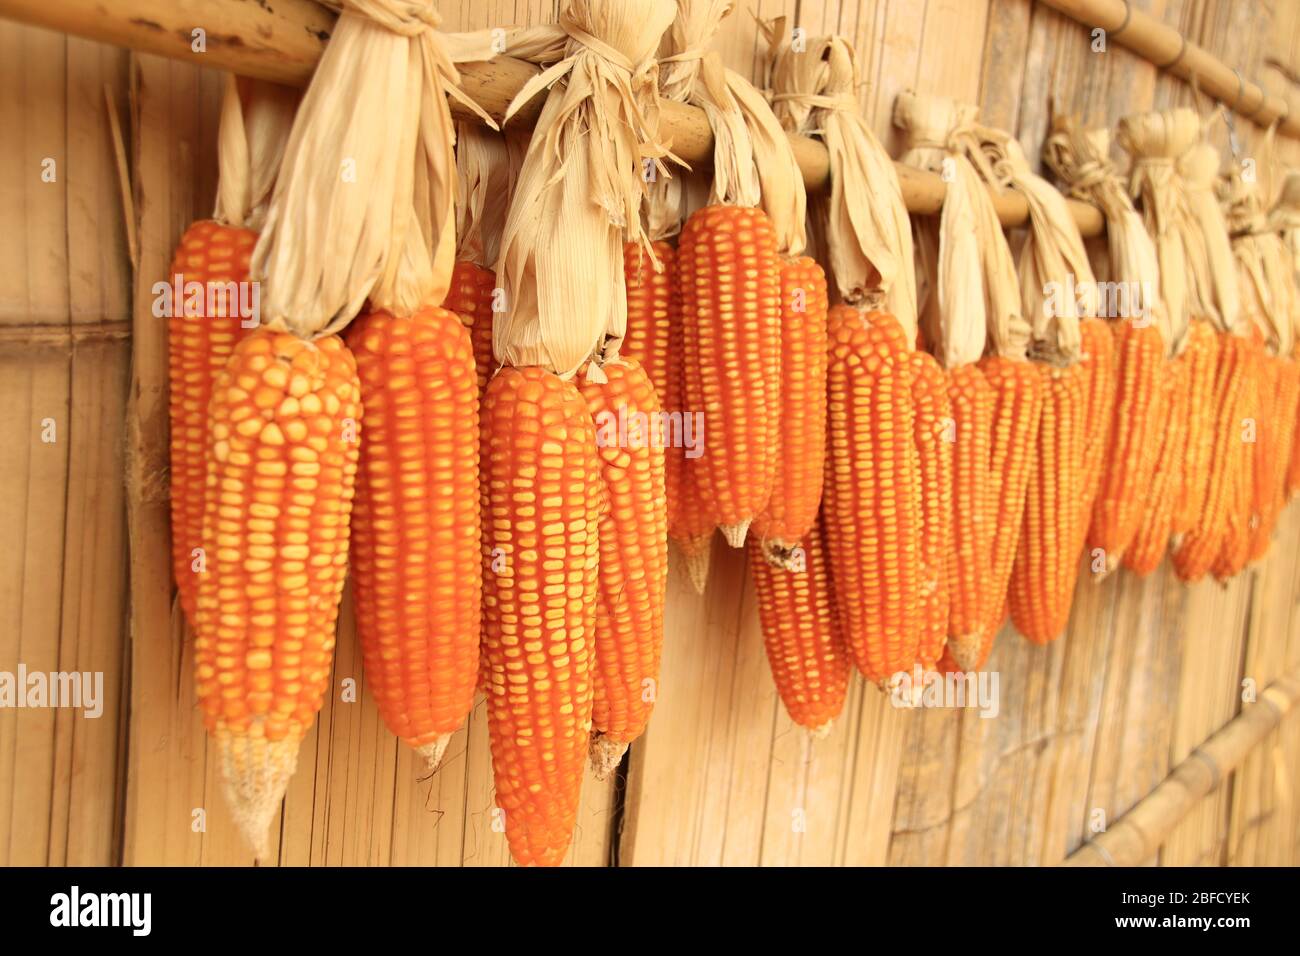 Traditional way of drying freshly harvested yellow corns, shows village life and culture Stock Photo